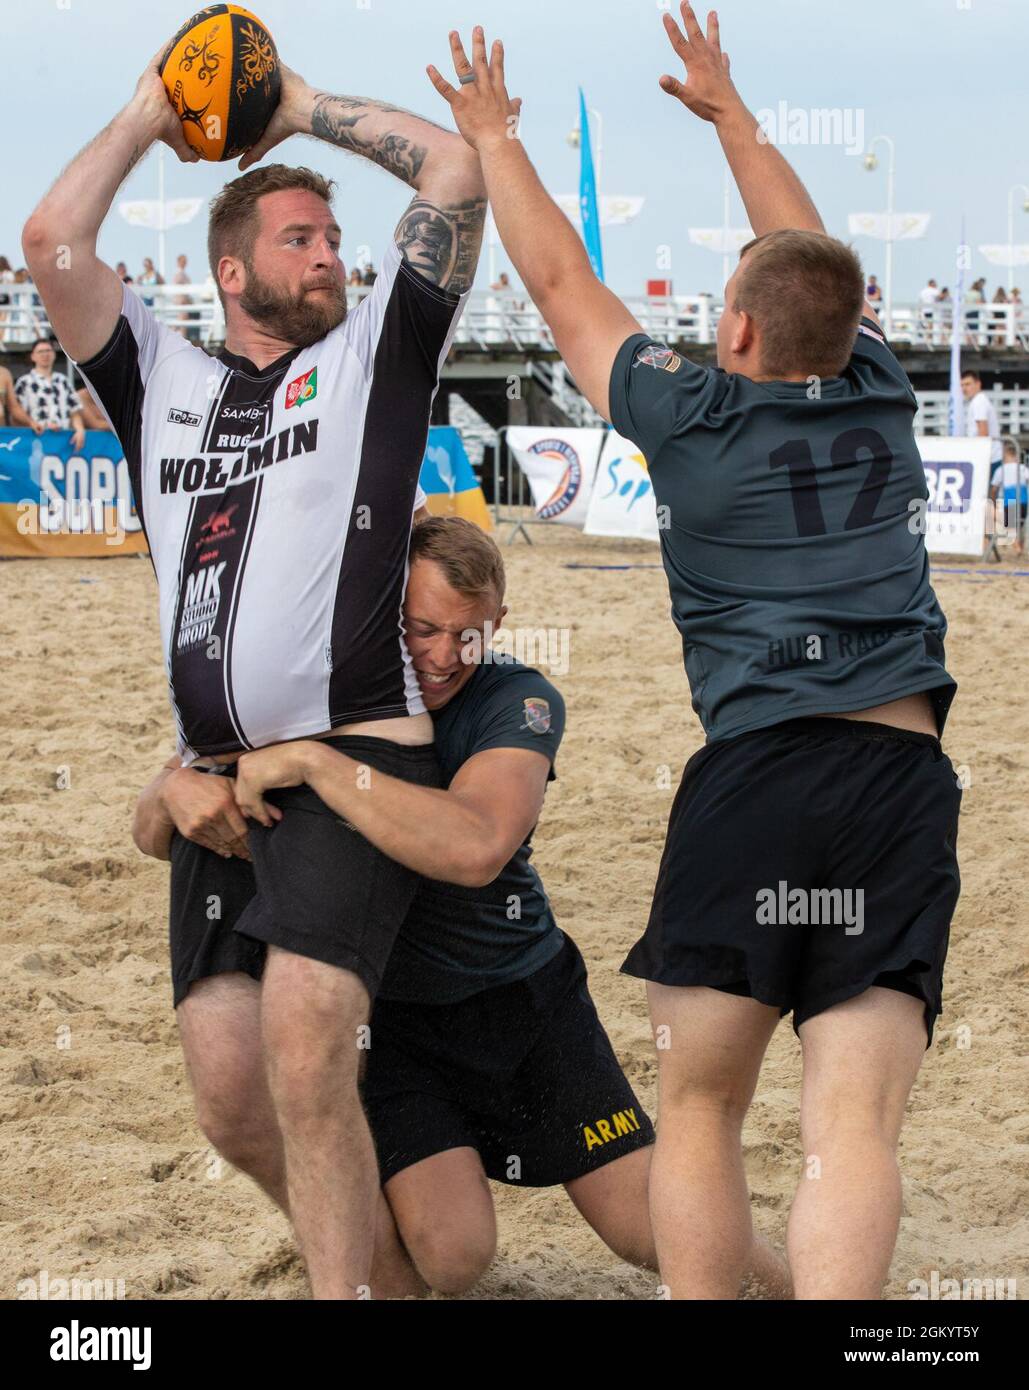 Sgt. Derek Dow, a team leader for Headquarters and Headquarters Company, 3rd Battalion “Dark Rifles,” 161st Infantry Regiment, tackles an opponent from behind as Pfc. Cody Hengeveld blocks the pass at the Sopot International Beach Rugby Tournament in Sopot, Poland, July 31, 2021. The Soldiers competed in the tournament to strengthen bonds with Polish locals and to increase ‘Dark Rifles’ interoperability. Stock Photo